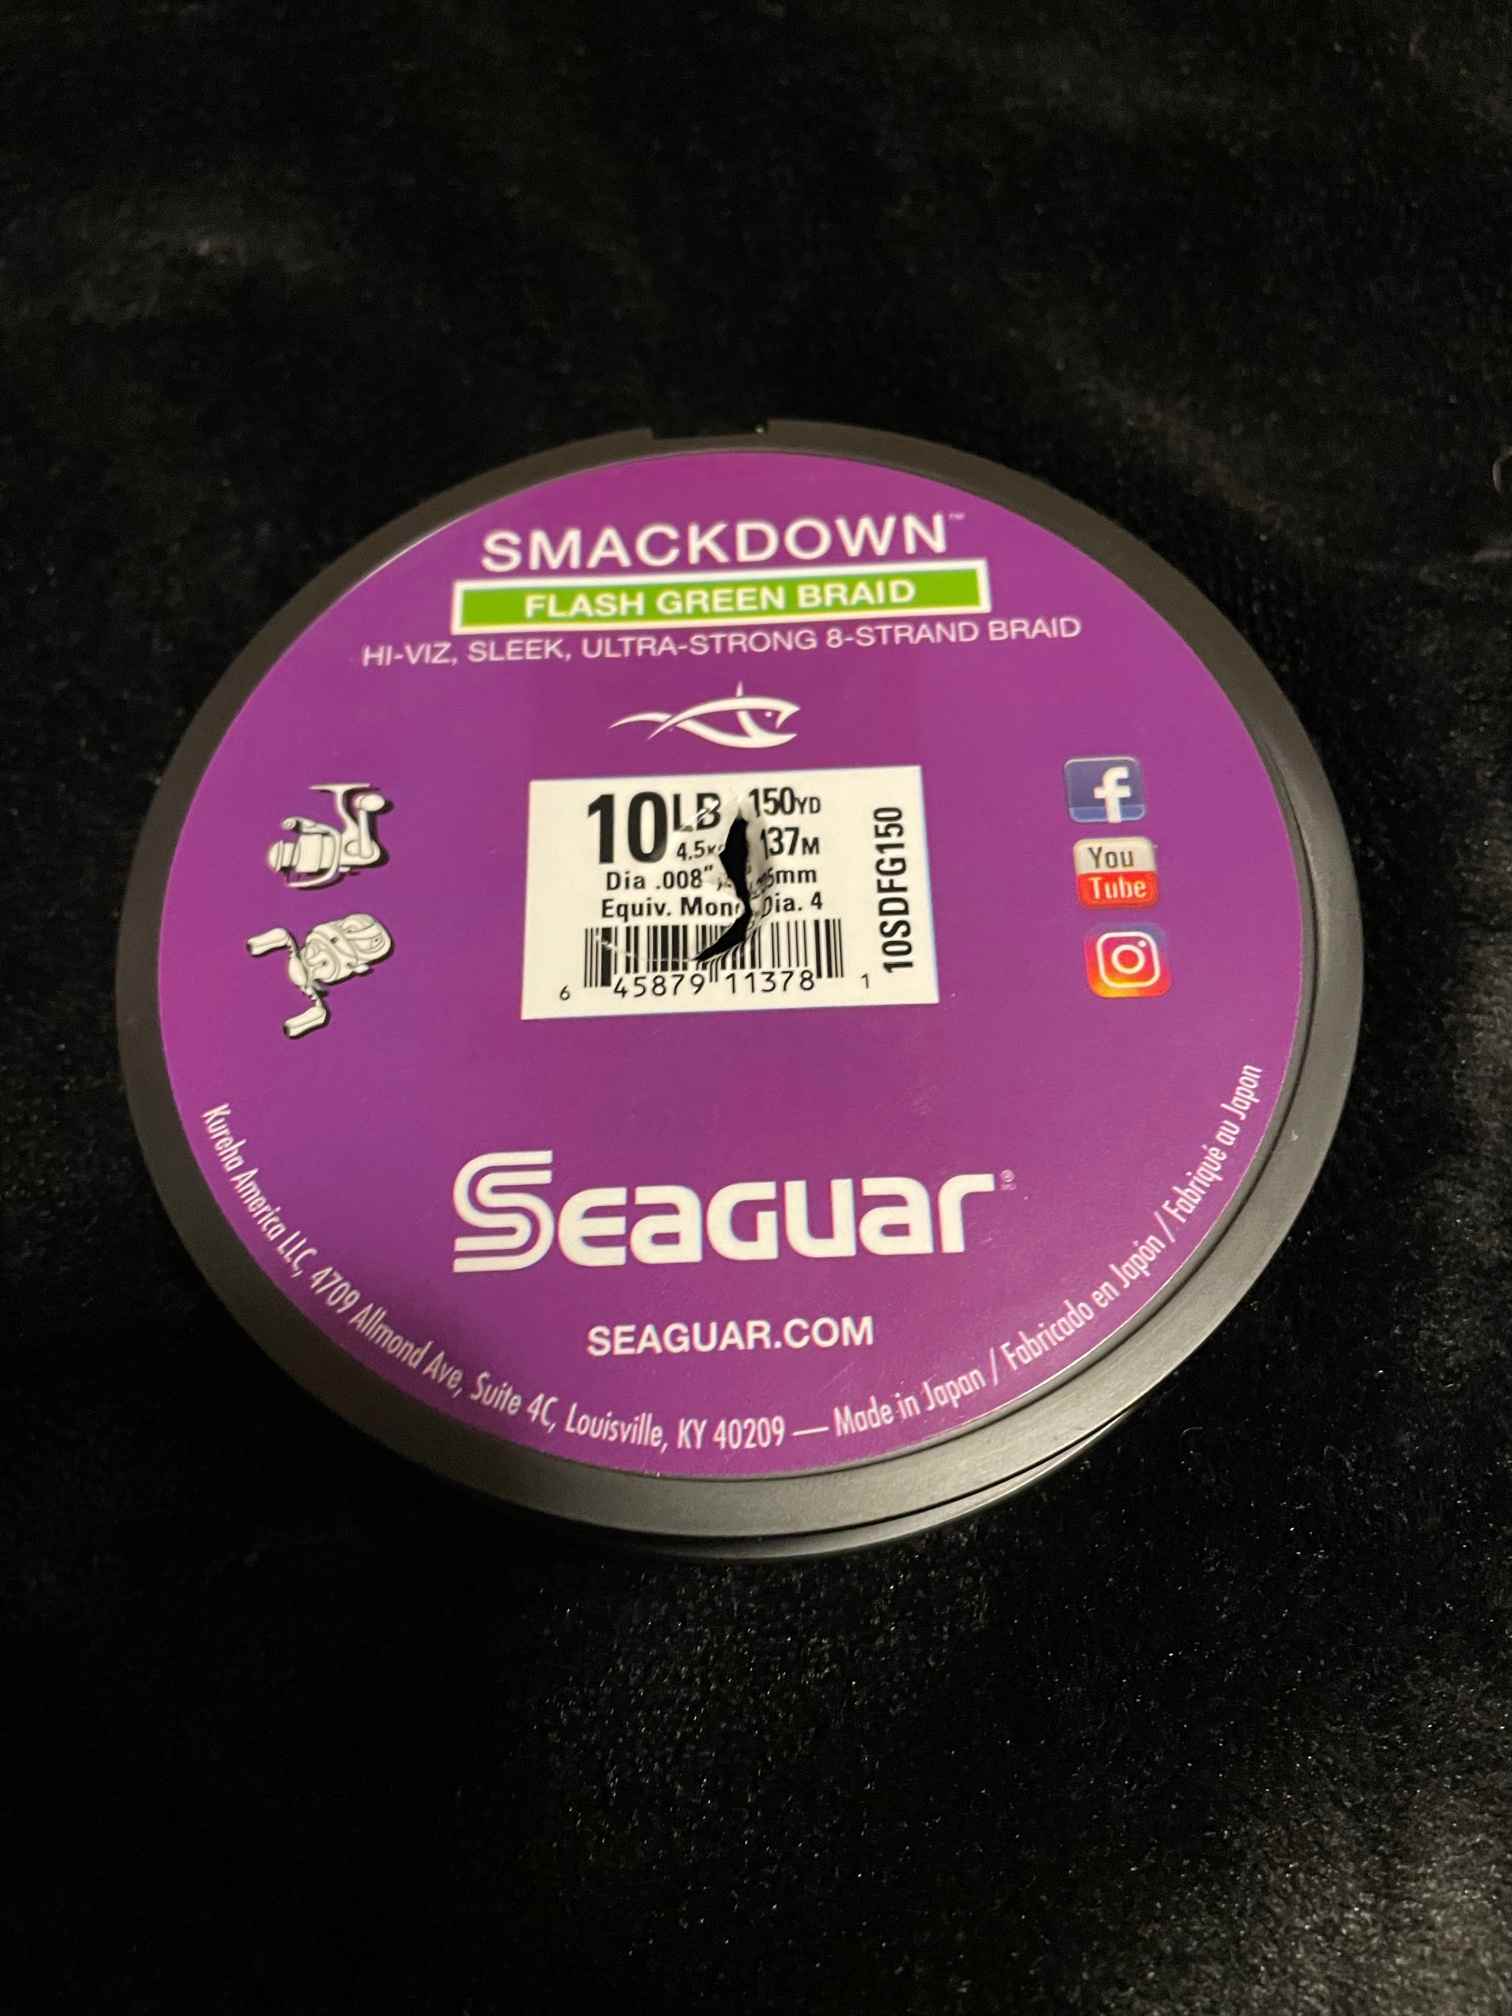 Seaguar Smackdown Issue, user error, bad spool, or freak accident - Fishing  Rods, Reels, Line, and Knots - Bass Fishing Forums